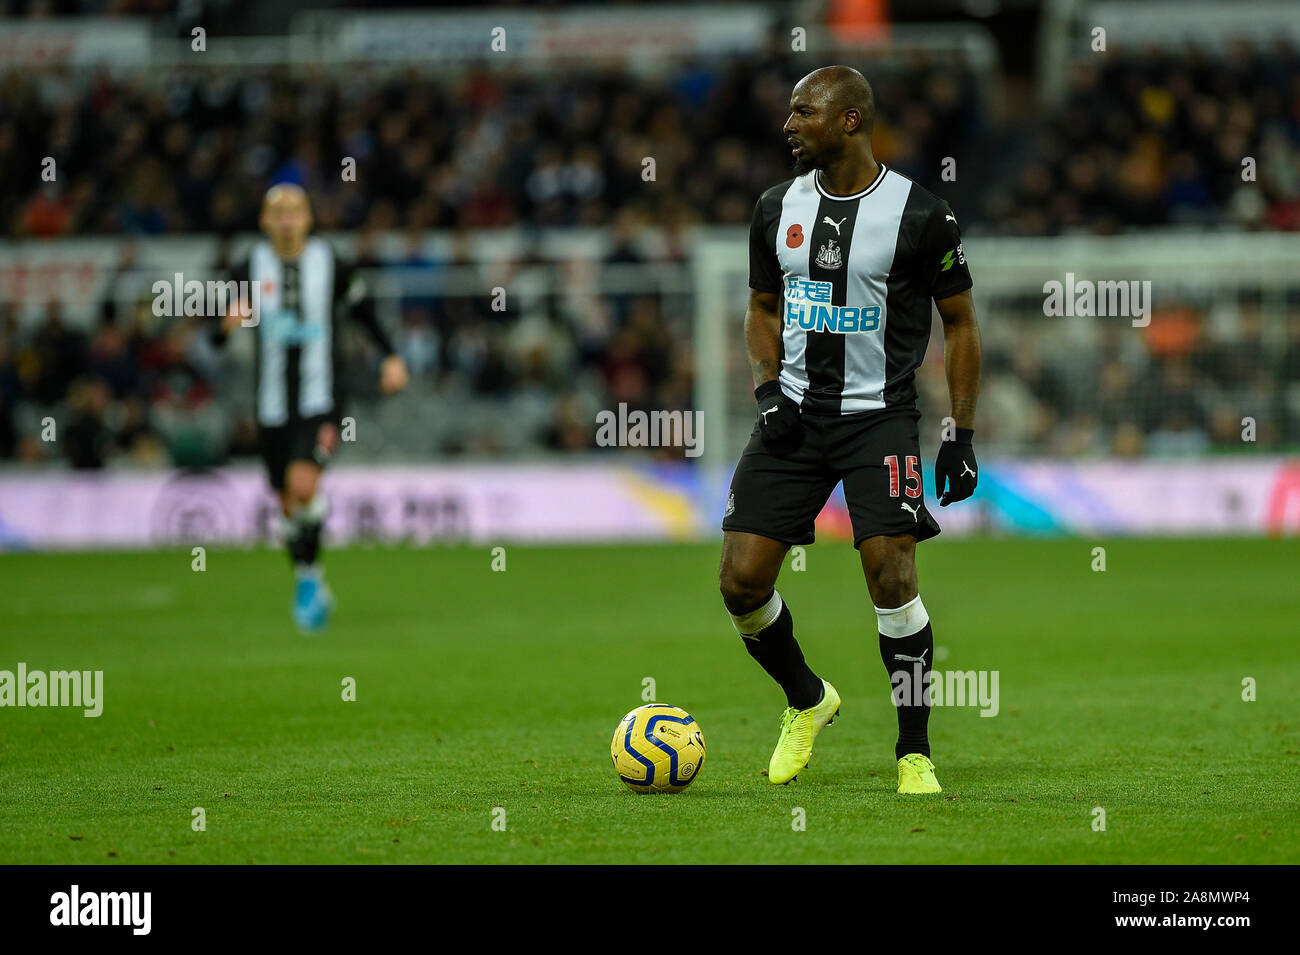 9th November 2019, St. James's Park, Newcastle, England; Premier League, Newcastle United v Bournemouth : Jetro Willems (15) of Newcastle United in action Credit: Iam Burn/News Images Stock Photo